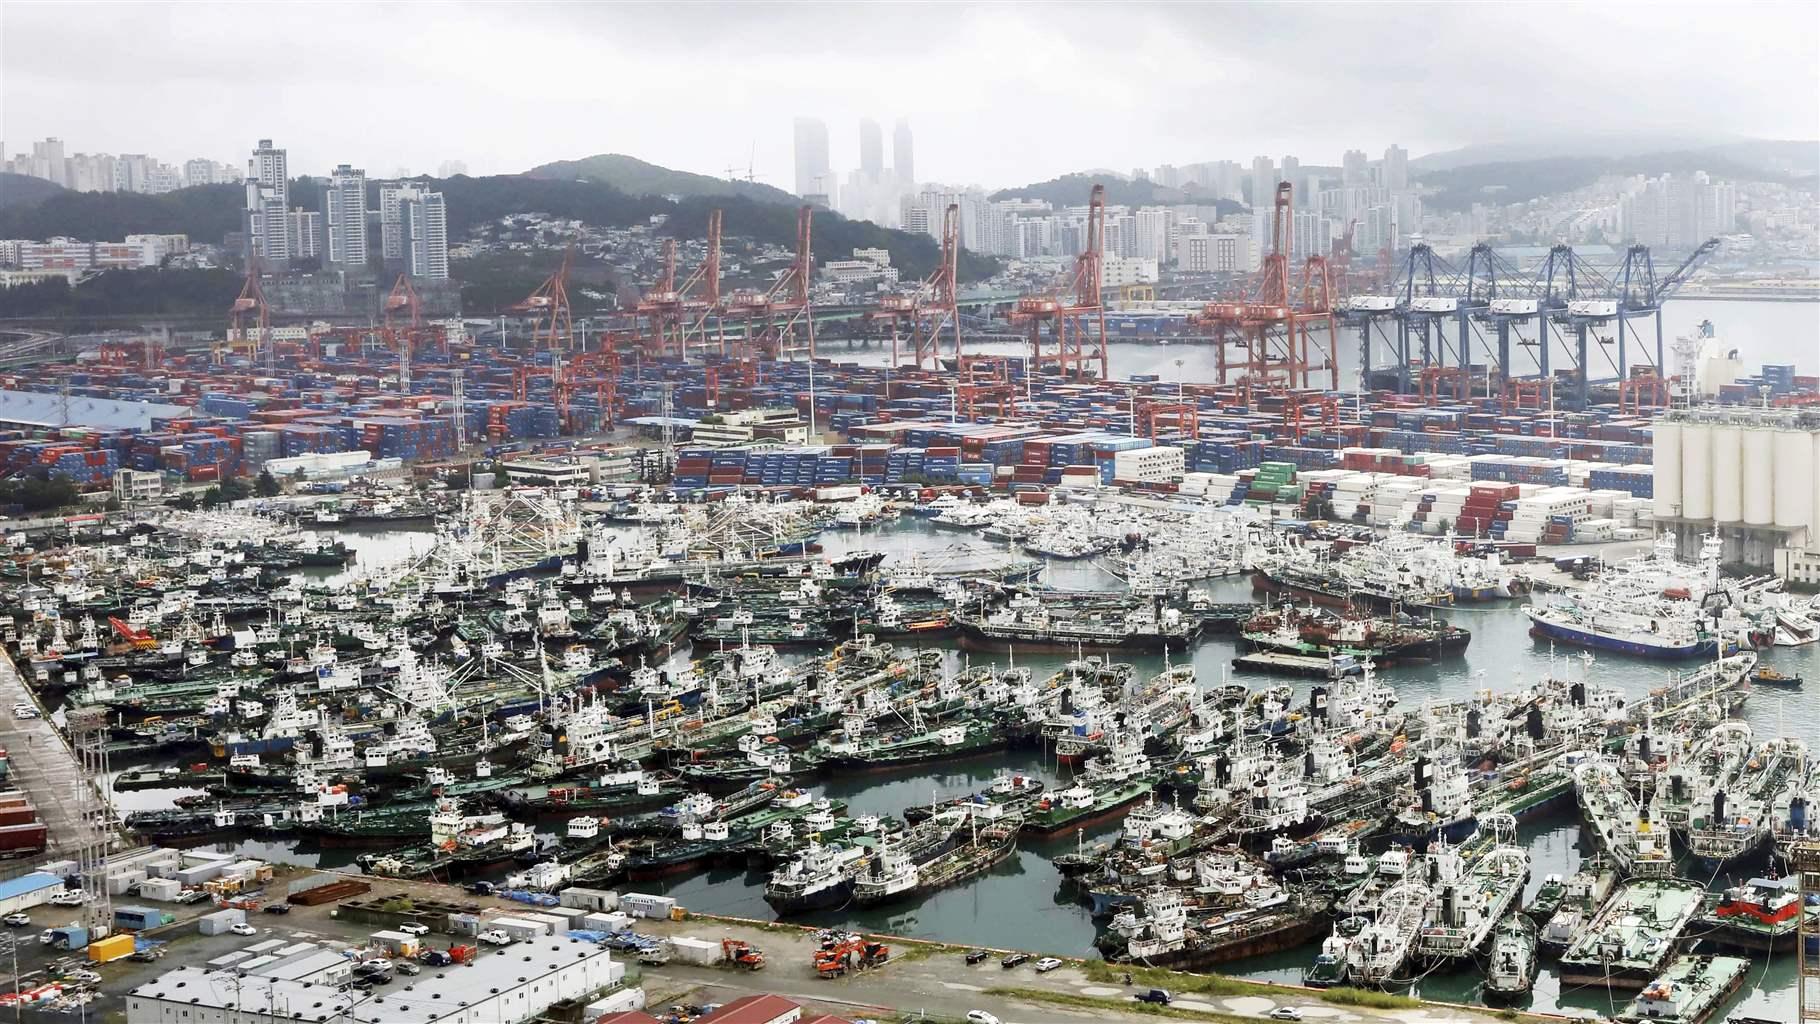 Fishing vessels, many with dark hulls with white wheelhouses, crowd together on a cloudy, gray day at the port of Busan, South Korea. Thousands of blue and red cargo boxes are stacked behind the ships, with large blue and red lifts. Skyscrapers and the hills of the city are seen in the distance. 